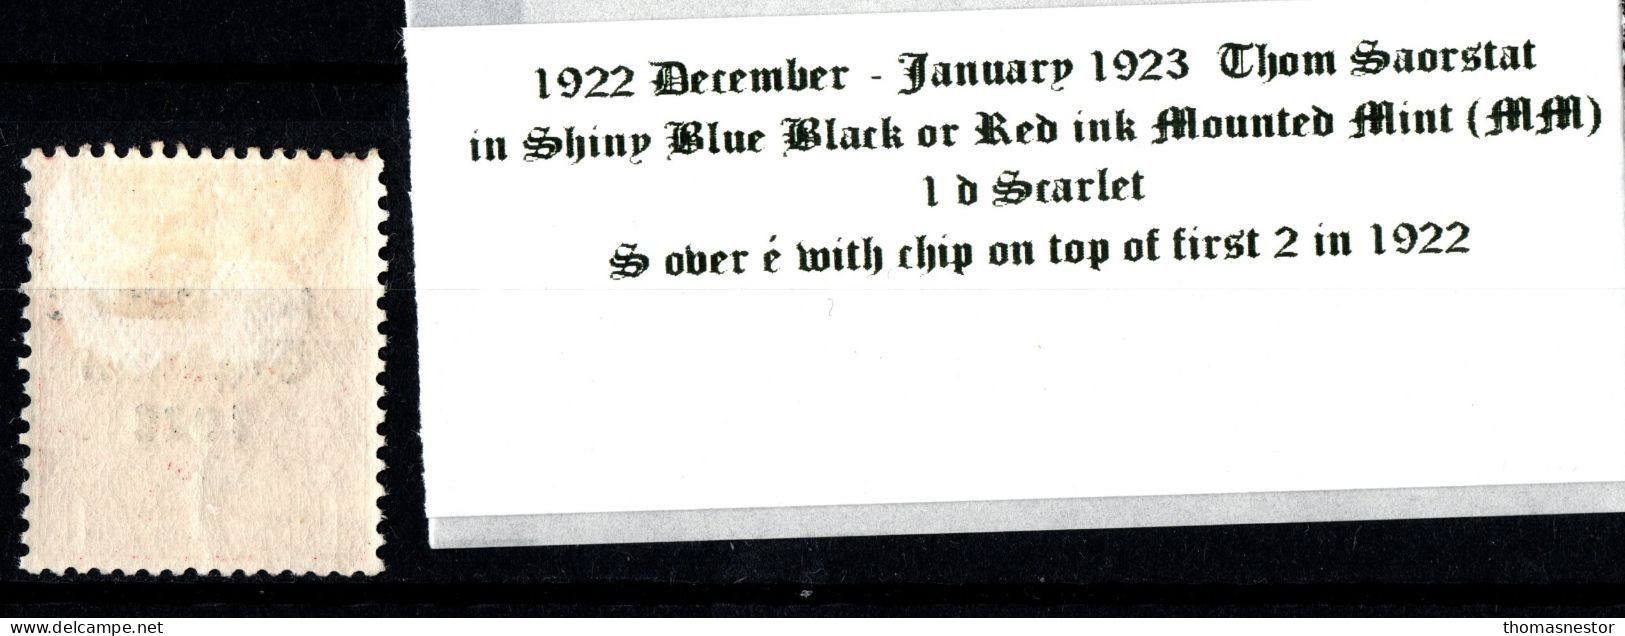 1922 - 1923 Dec-Jan Thom Saorstát In Shiny Blue Black Or Red Ink With S Over é, 1 D Scarlet, Mounted Mint (MM) - Ongebruikt